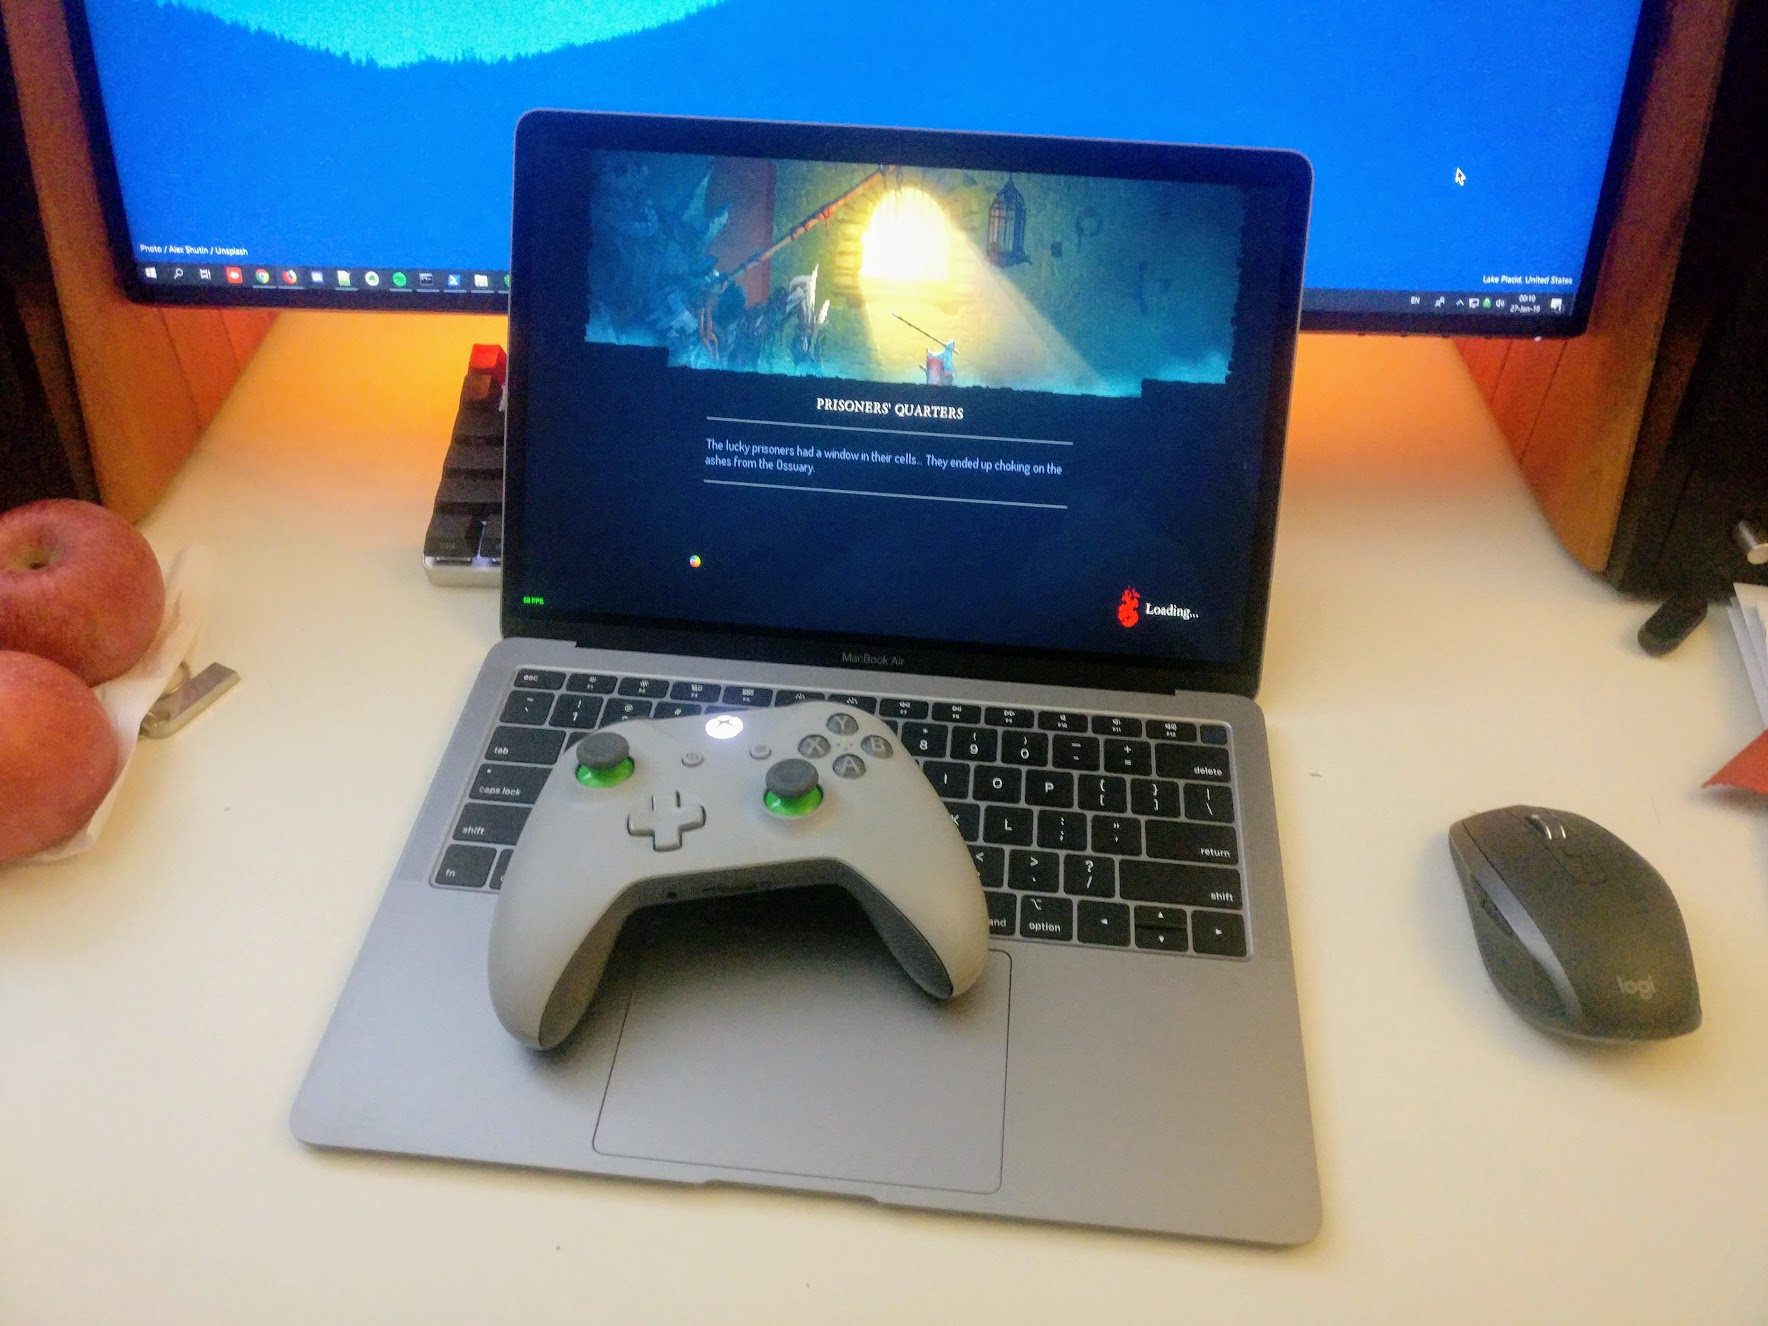 Macbook isn't made for gaming